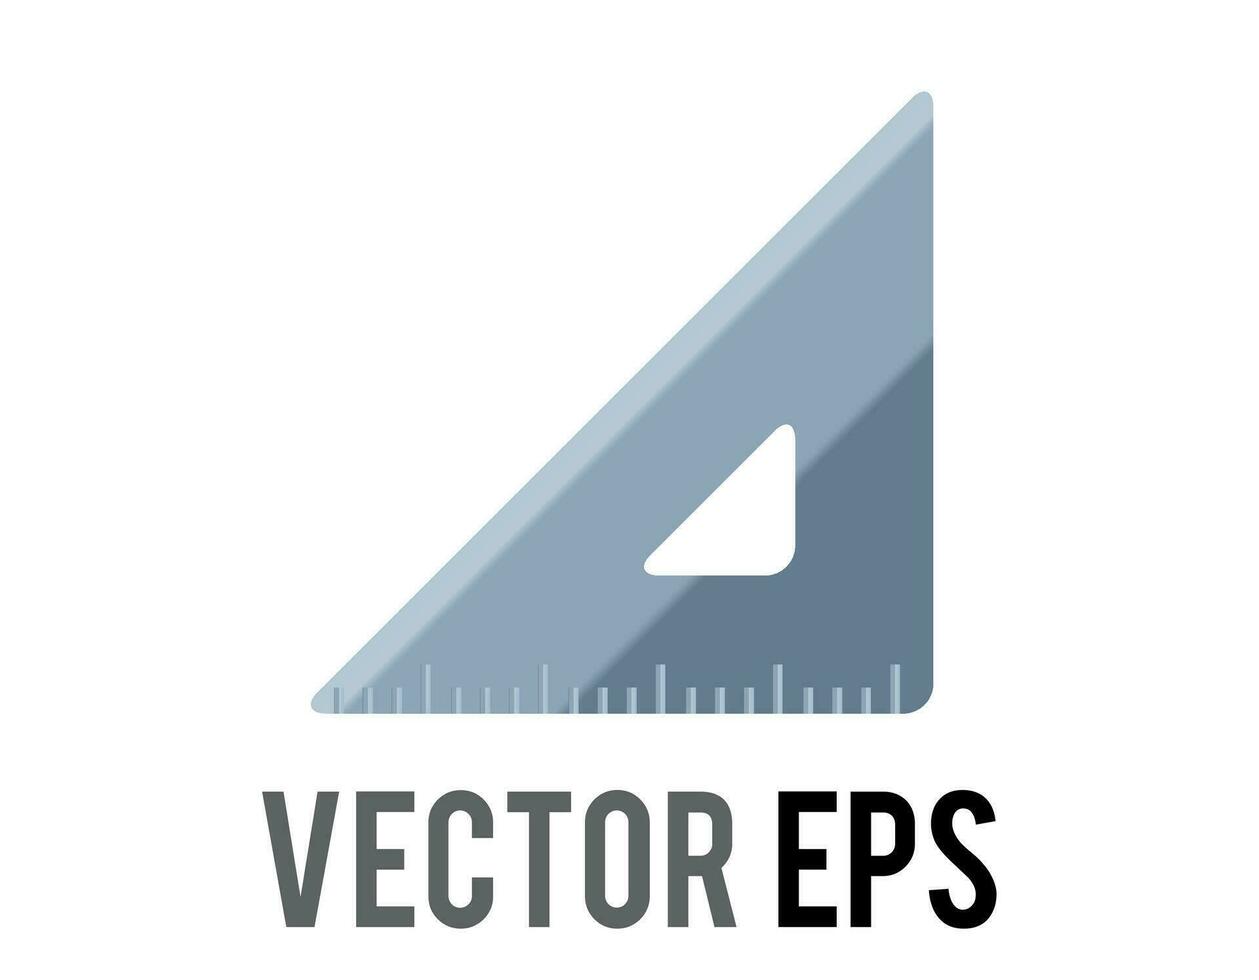 vector silver metal triangular ruler icon, as used to draw lines and measure distance